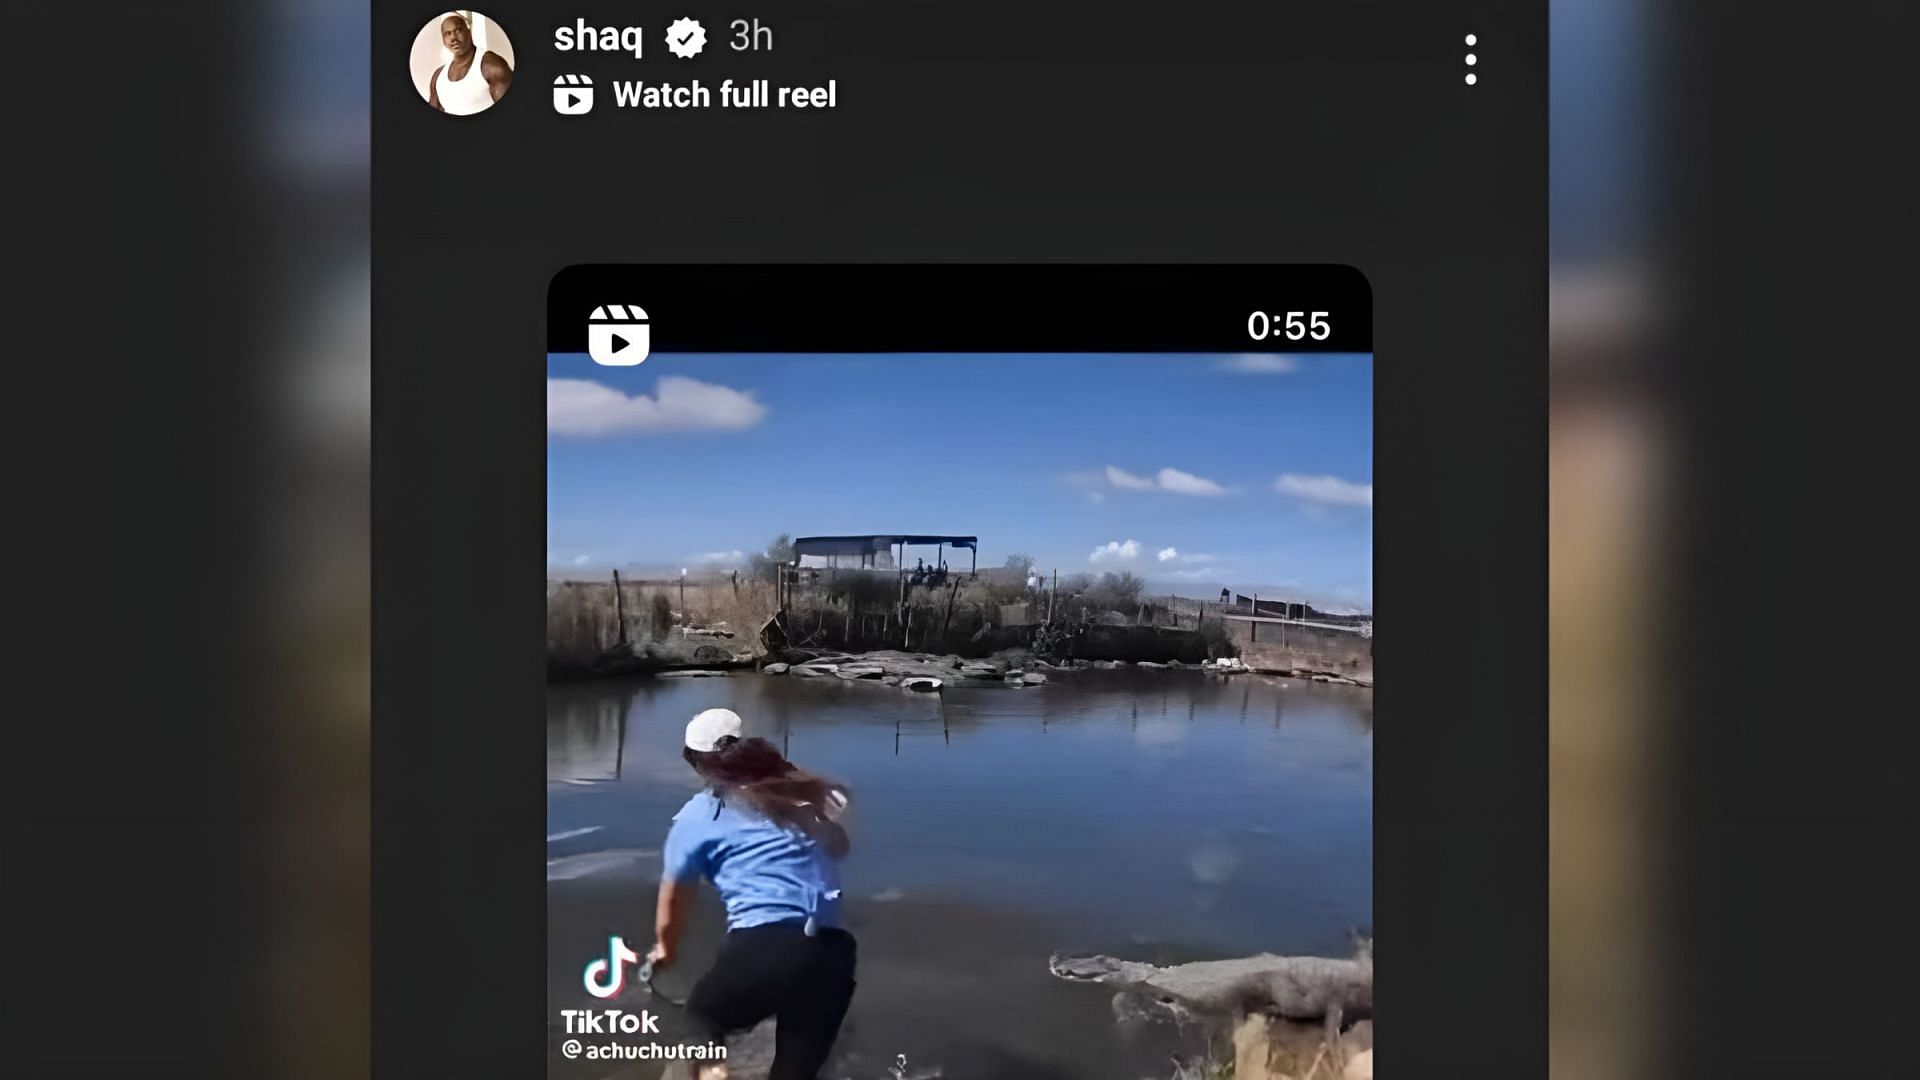 Shaquille O&rsquo;Neal shares a viral video of a fearless woman jumping into an alligator enclosure